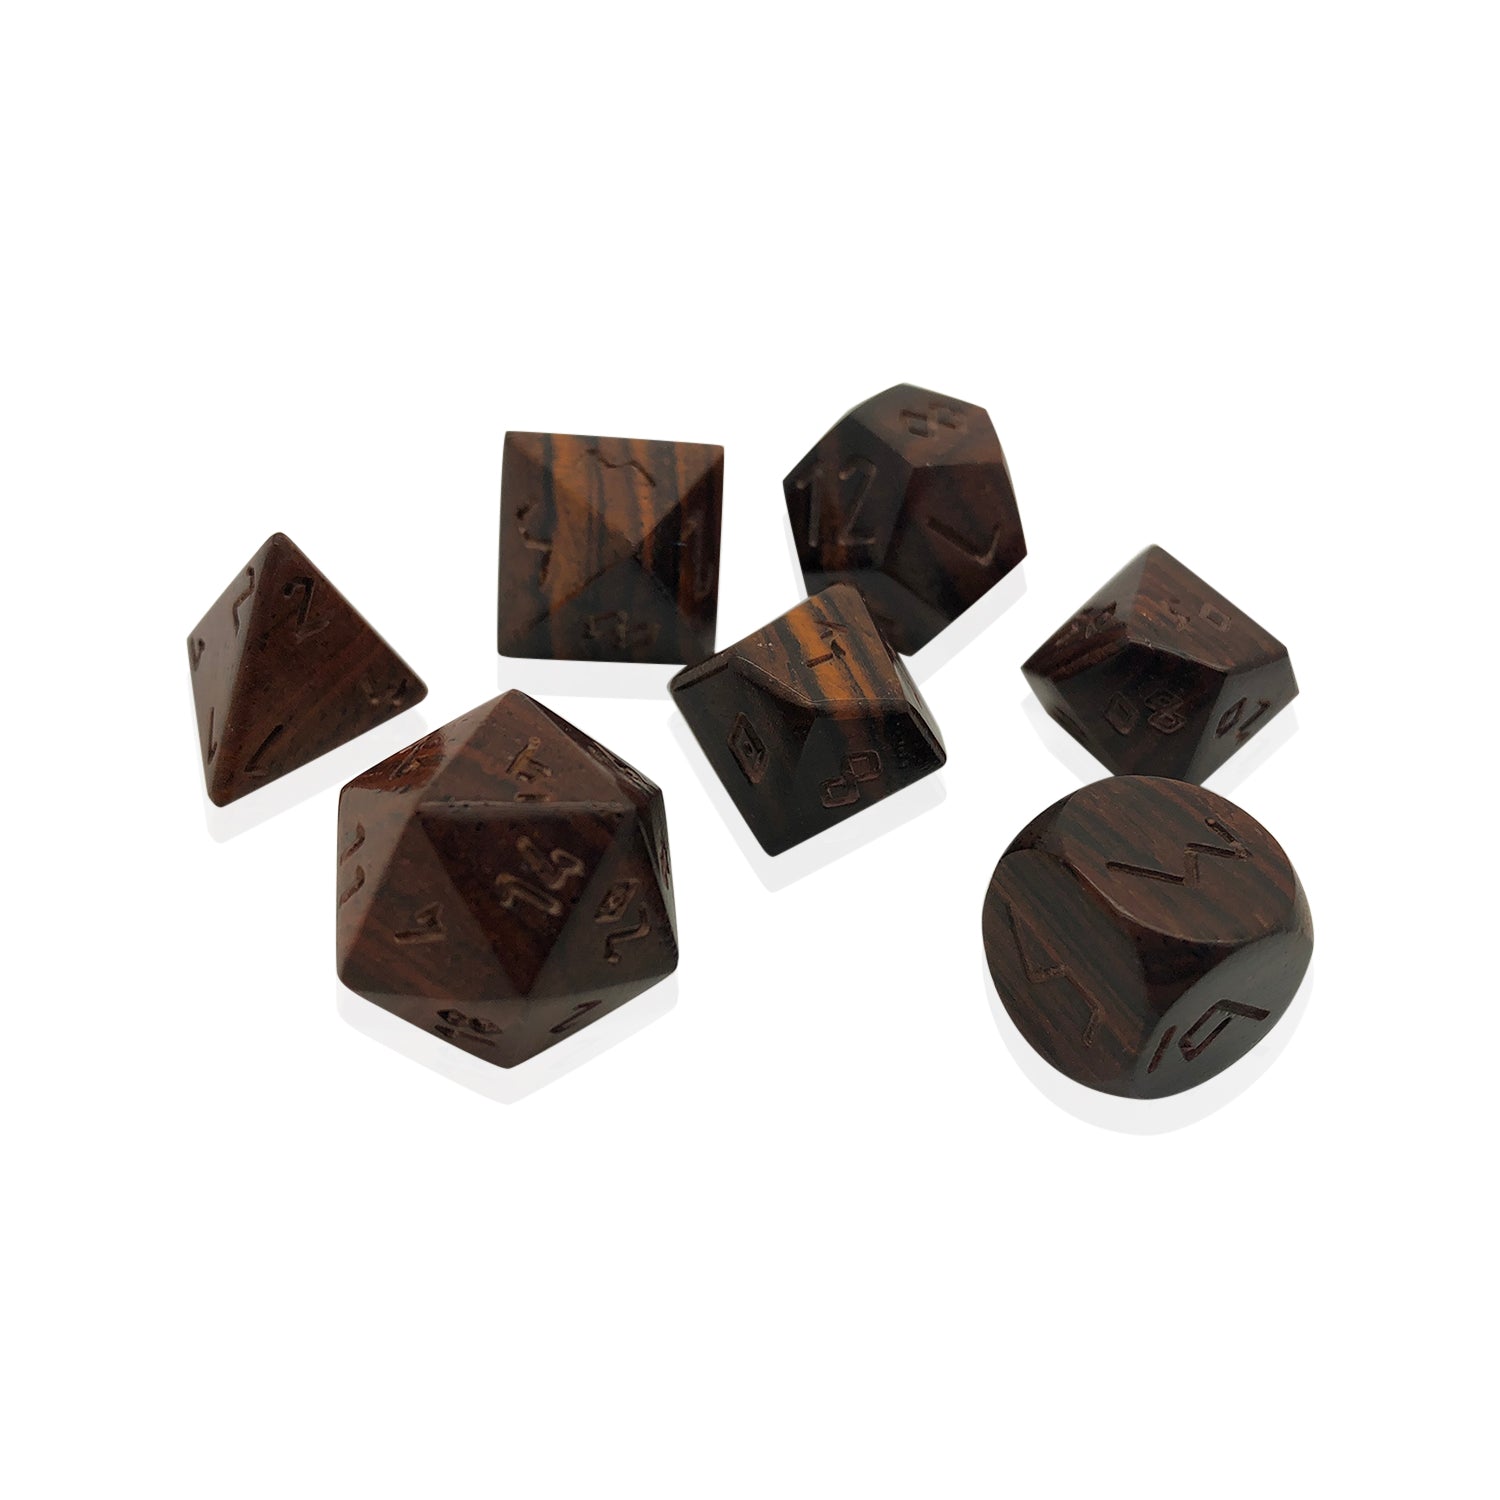 Siamese Rosewood - 7 Piece RPG Wooden Dice Set